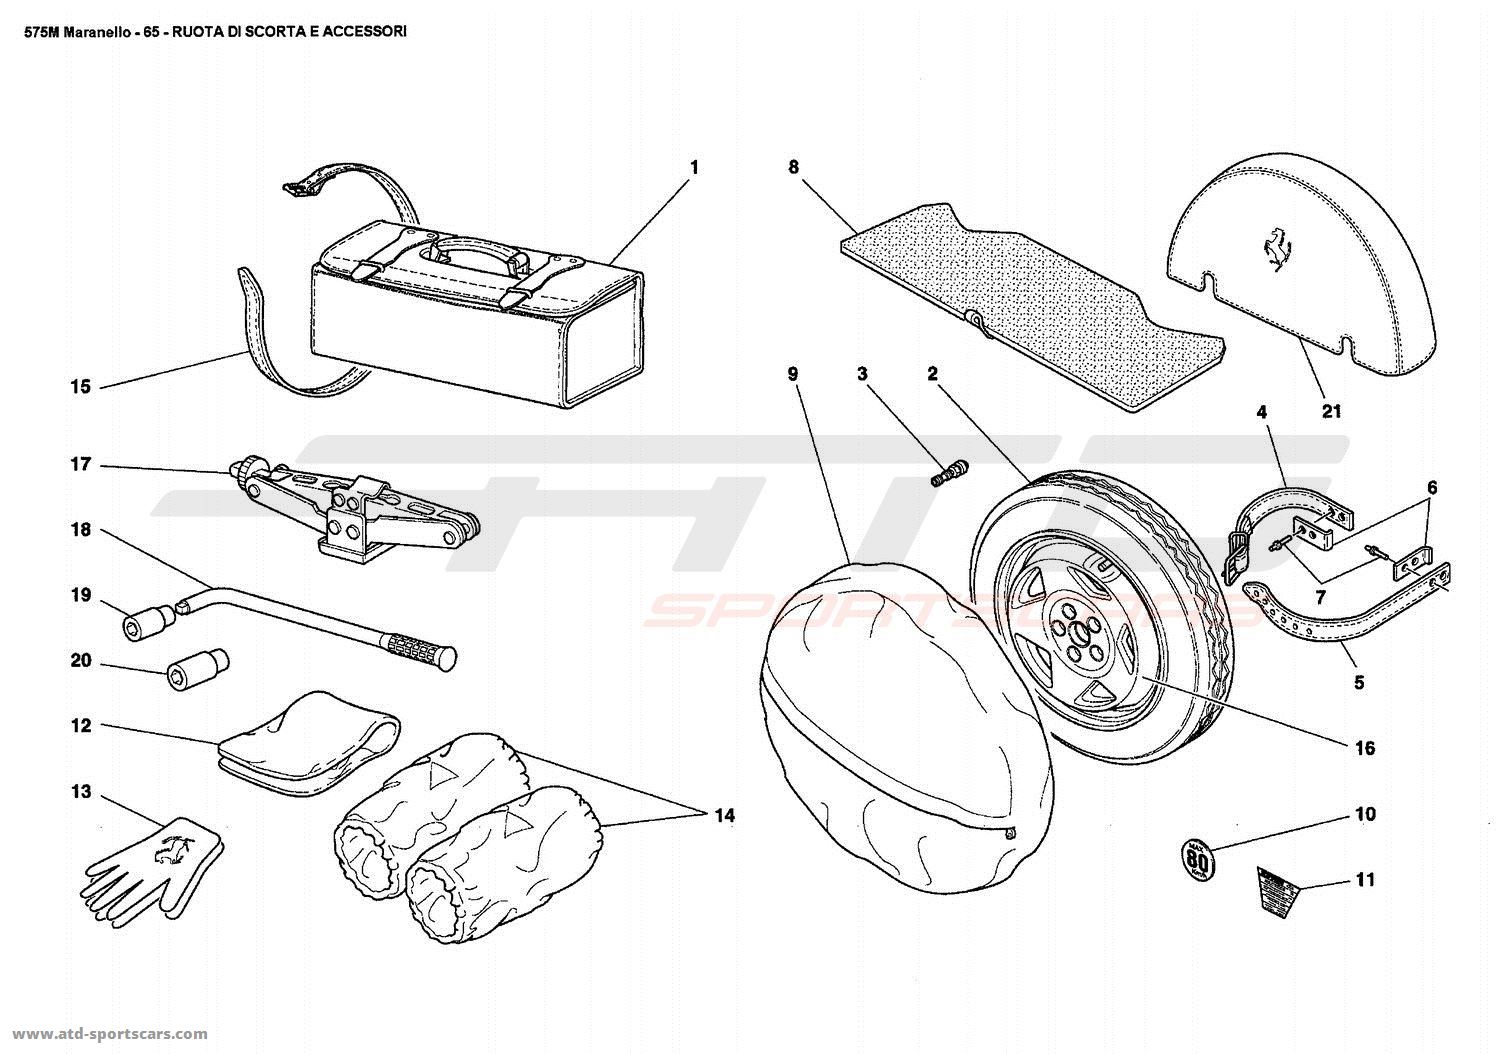 SPARE WHEEL AND ACCESSORIES